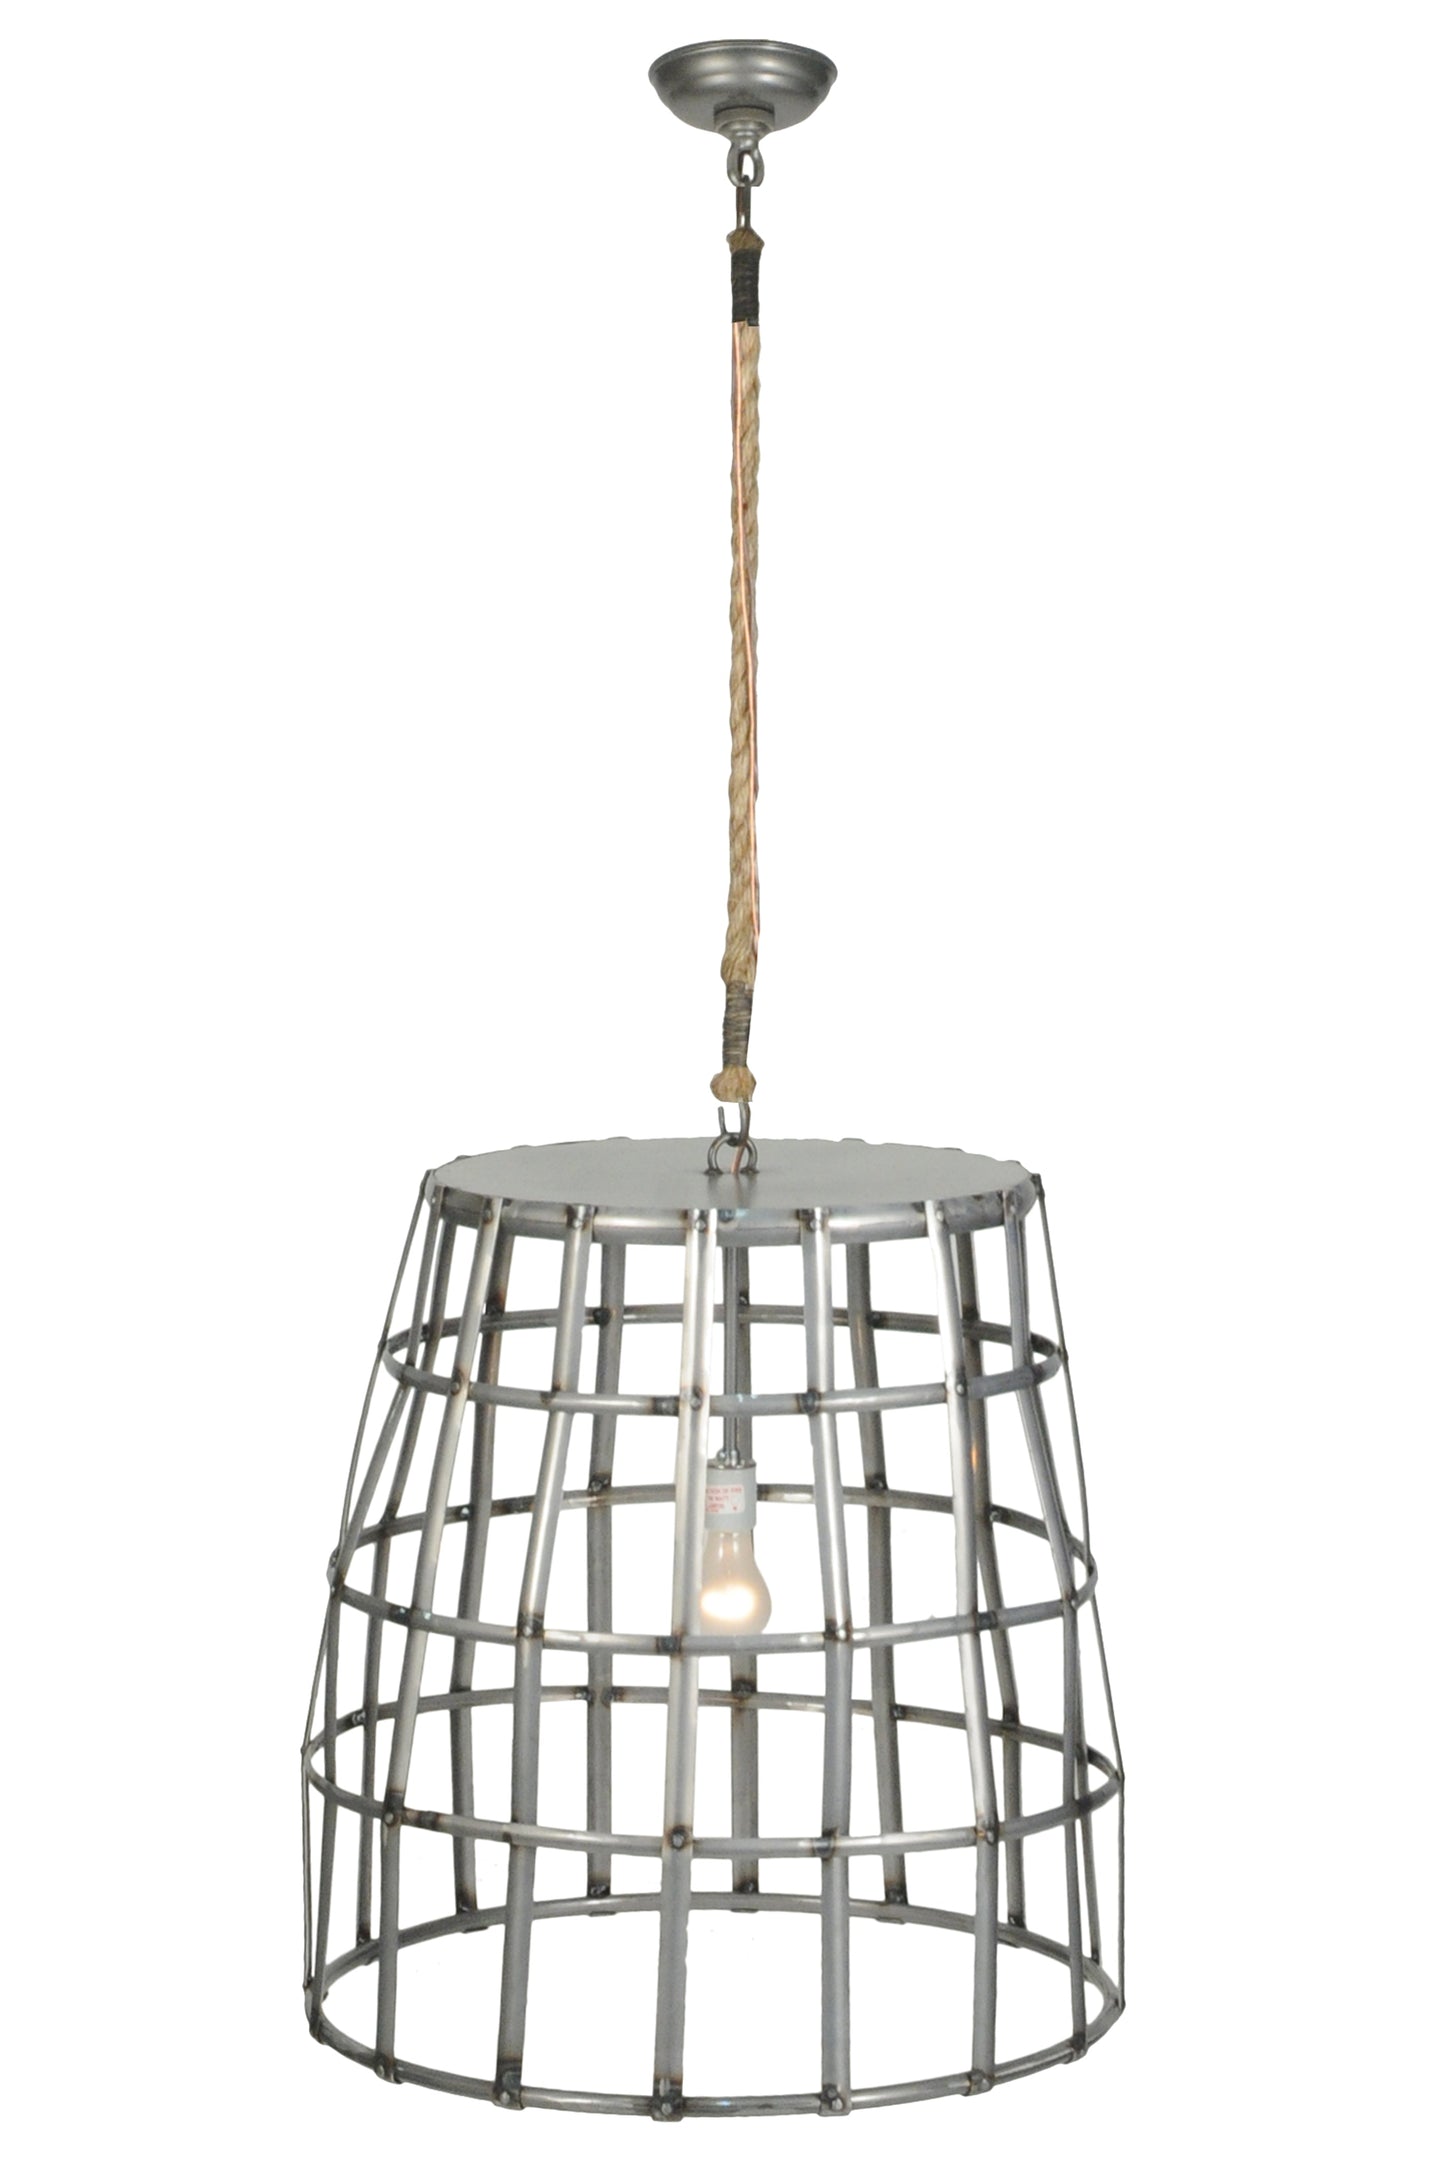 21.75" Basket Pendant by 2nd Ave Lighting